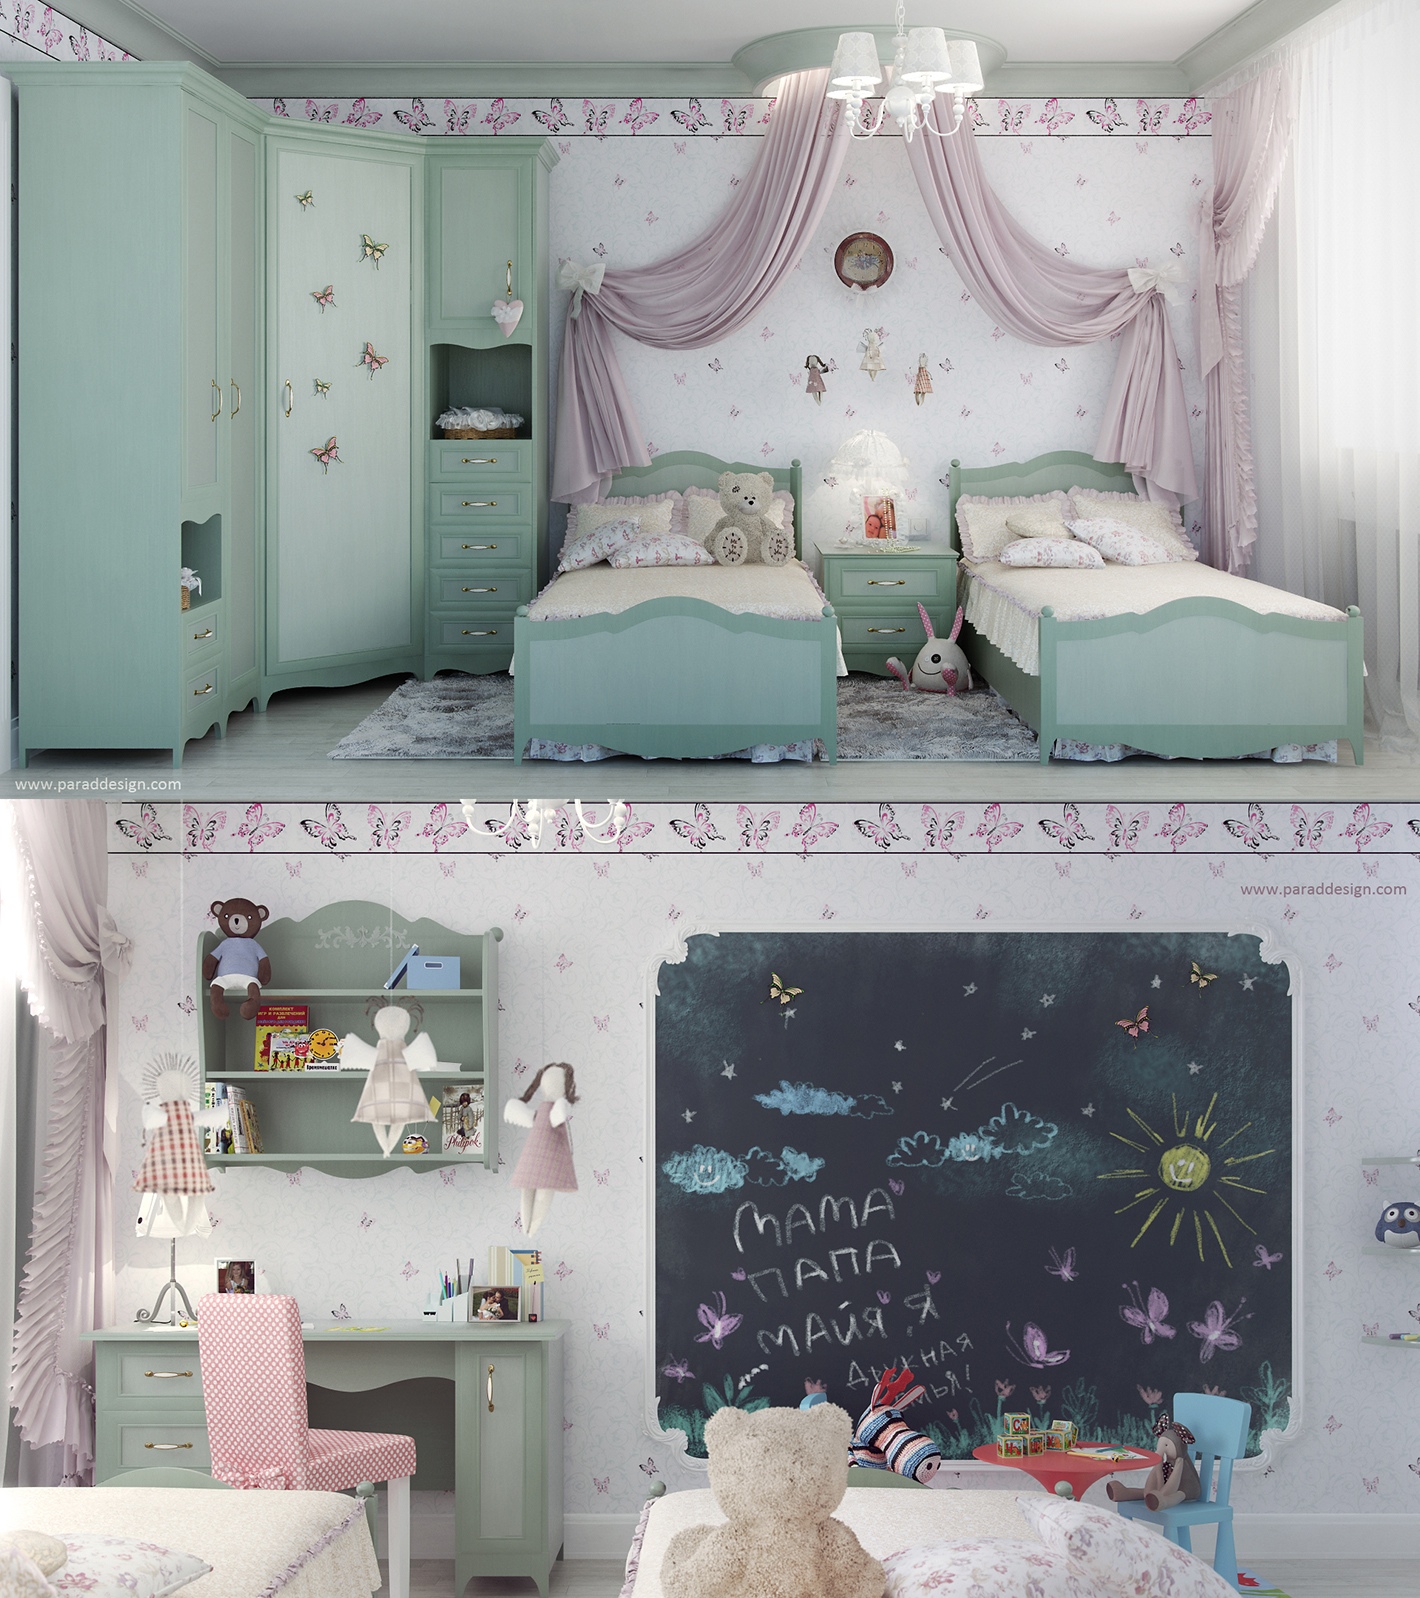 Decorating girls bedroom design "width =" 1420 "height =" 1598 "srcset =" https://mileray.com/wp-content/uploads/2020/05/1588509473_976_Adorable-Girls-Bedroom-Designs-With-Pink-Color-Shade-and-Fantastic.jpeg 1420w, https: // myfashionos. com /wp-content/uploads/2016/09/Parad-Design-267x300.jpeg 267w, https://mileray.com/wp-content/uploads/2016/09/Parad-Design-768x864.jpeg 768w, https: / /mileray.com/wp-content/uploads/2016/09/Parad-Design-910x1024.jpeg 910w, https://mileray.com/wp-content/uploads/2016/09/Parad-Design-696x783.jpeg 696w, https://mileray.com/wp-content/uploads/2016/09/Parad-Design-1068x1202.jpeg 1068w, https://mileray.com/wp-content/uploads/2016/09/Parad-Design - 373x420.jpeg 373w "sizes =" (maximum width: 1420px) 100vw, 1420px